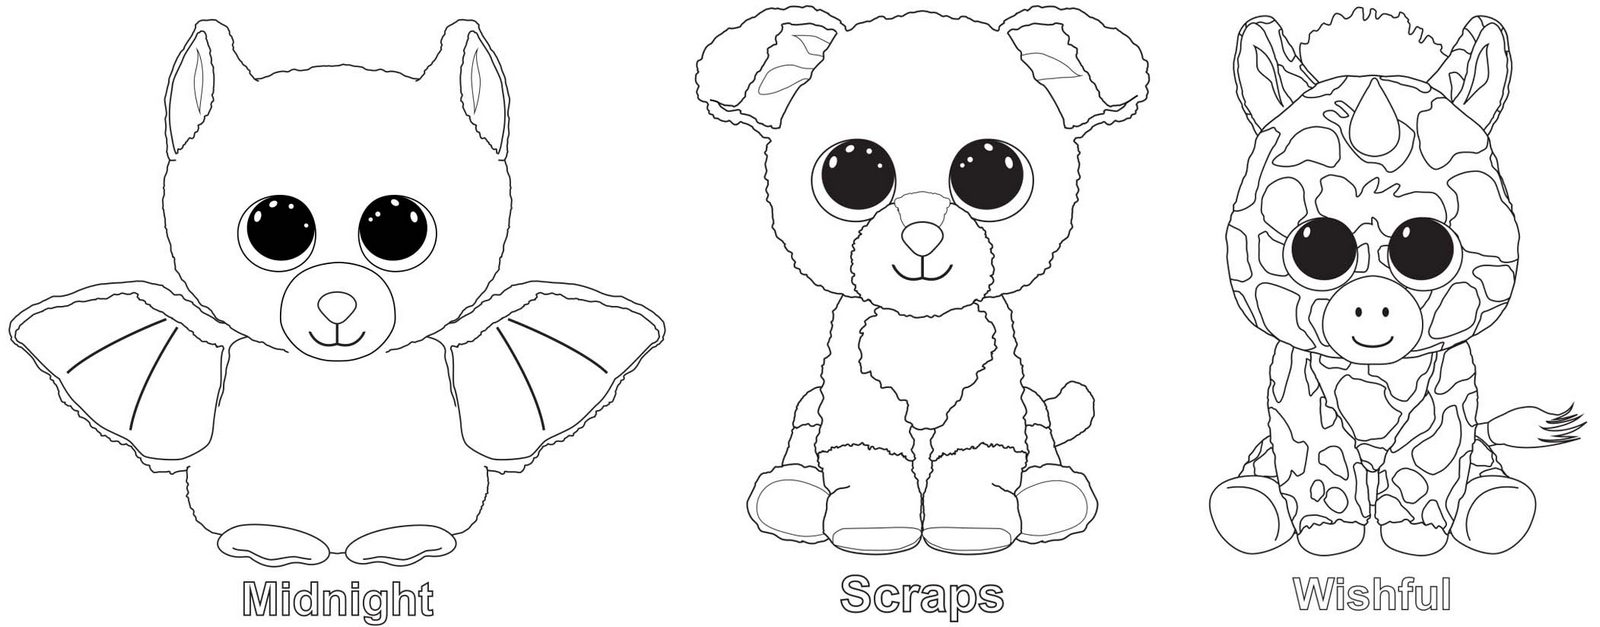 Midnight Scraps Wishful from Beanie Boo Coloring Page